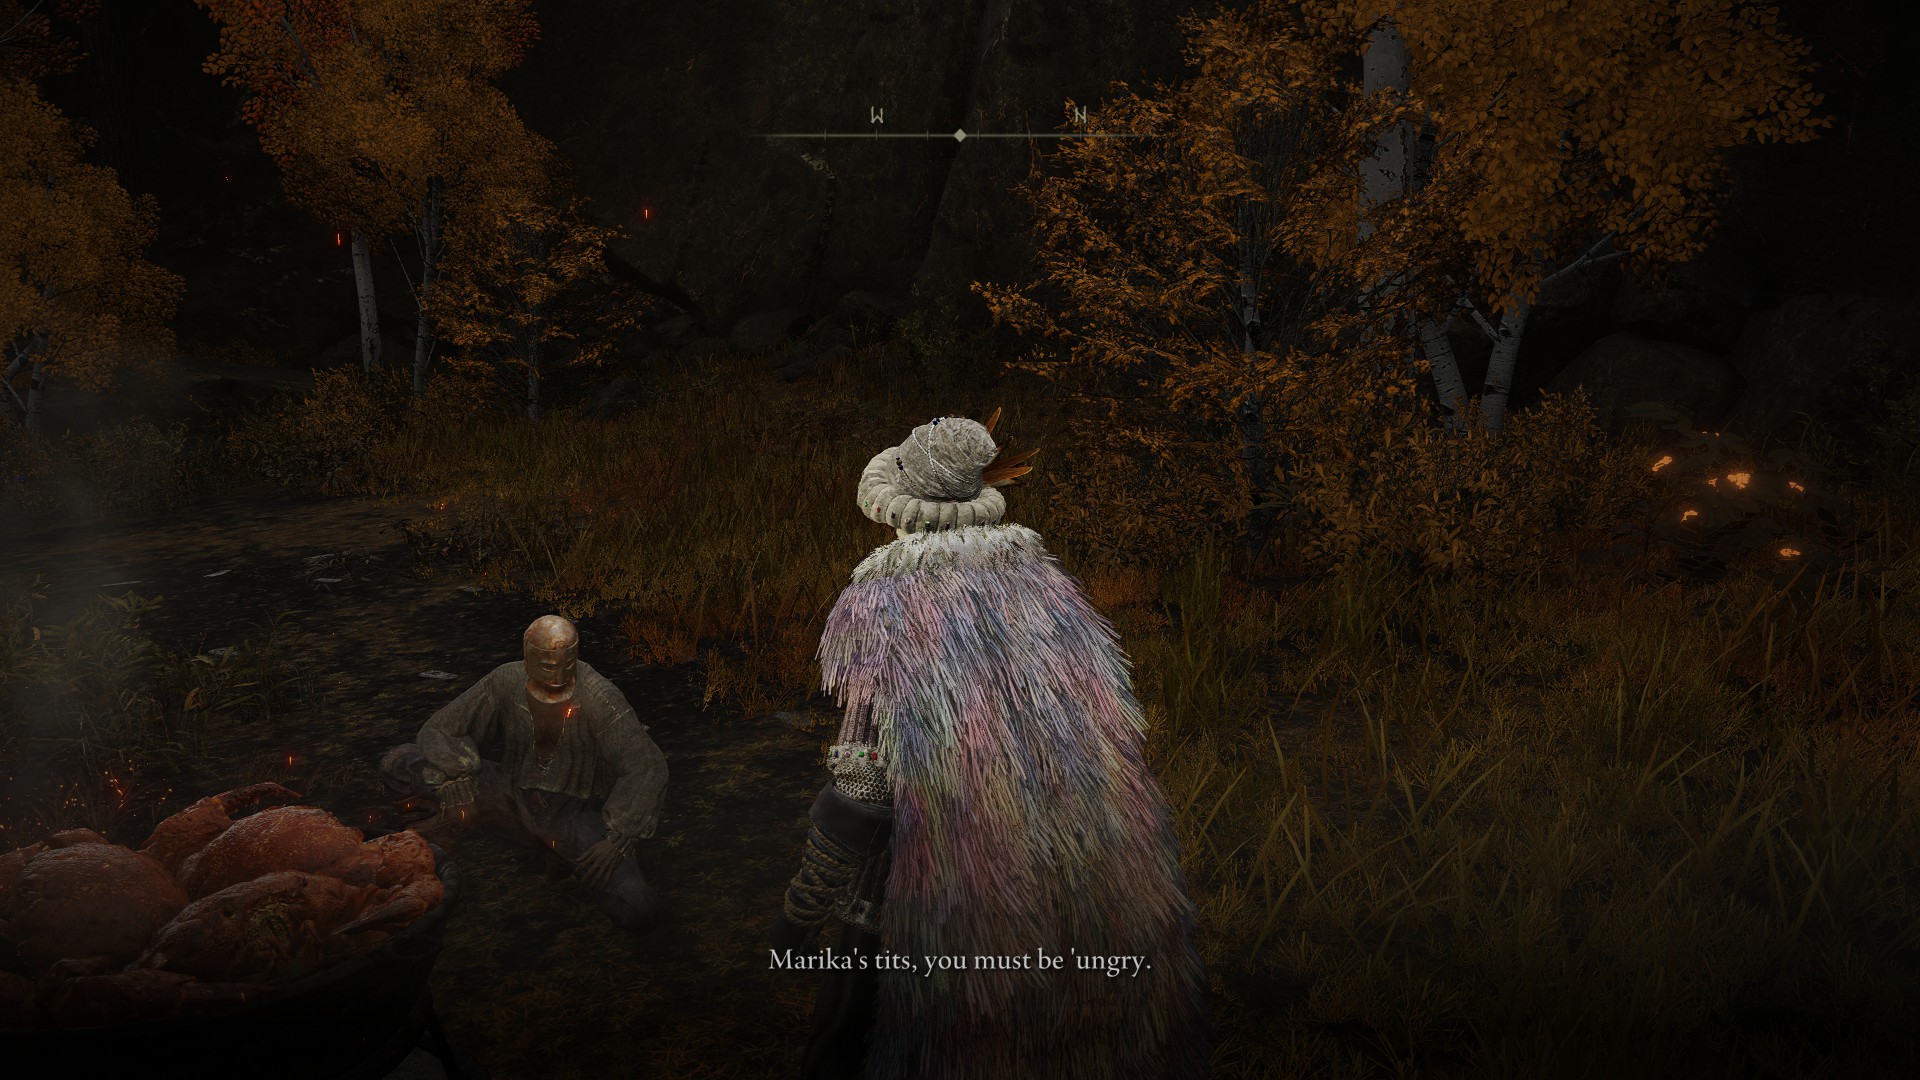 Screenshot from Elden Ring: a player character talks with Blackguard Big Boggart, who exclaims "Marika's tits, you must be 'ungry."